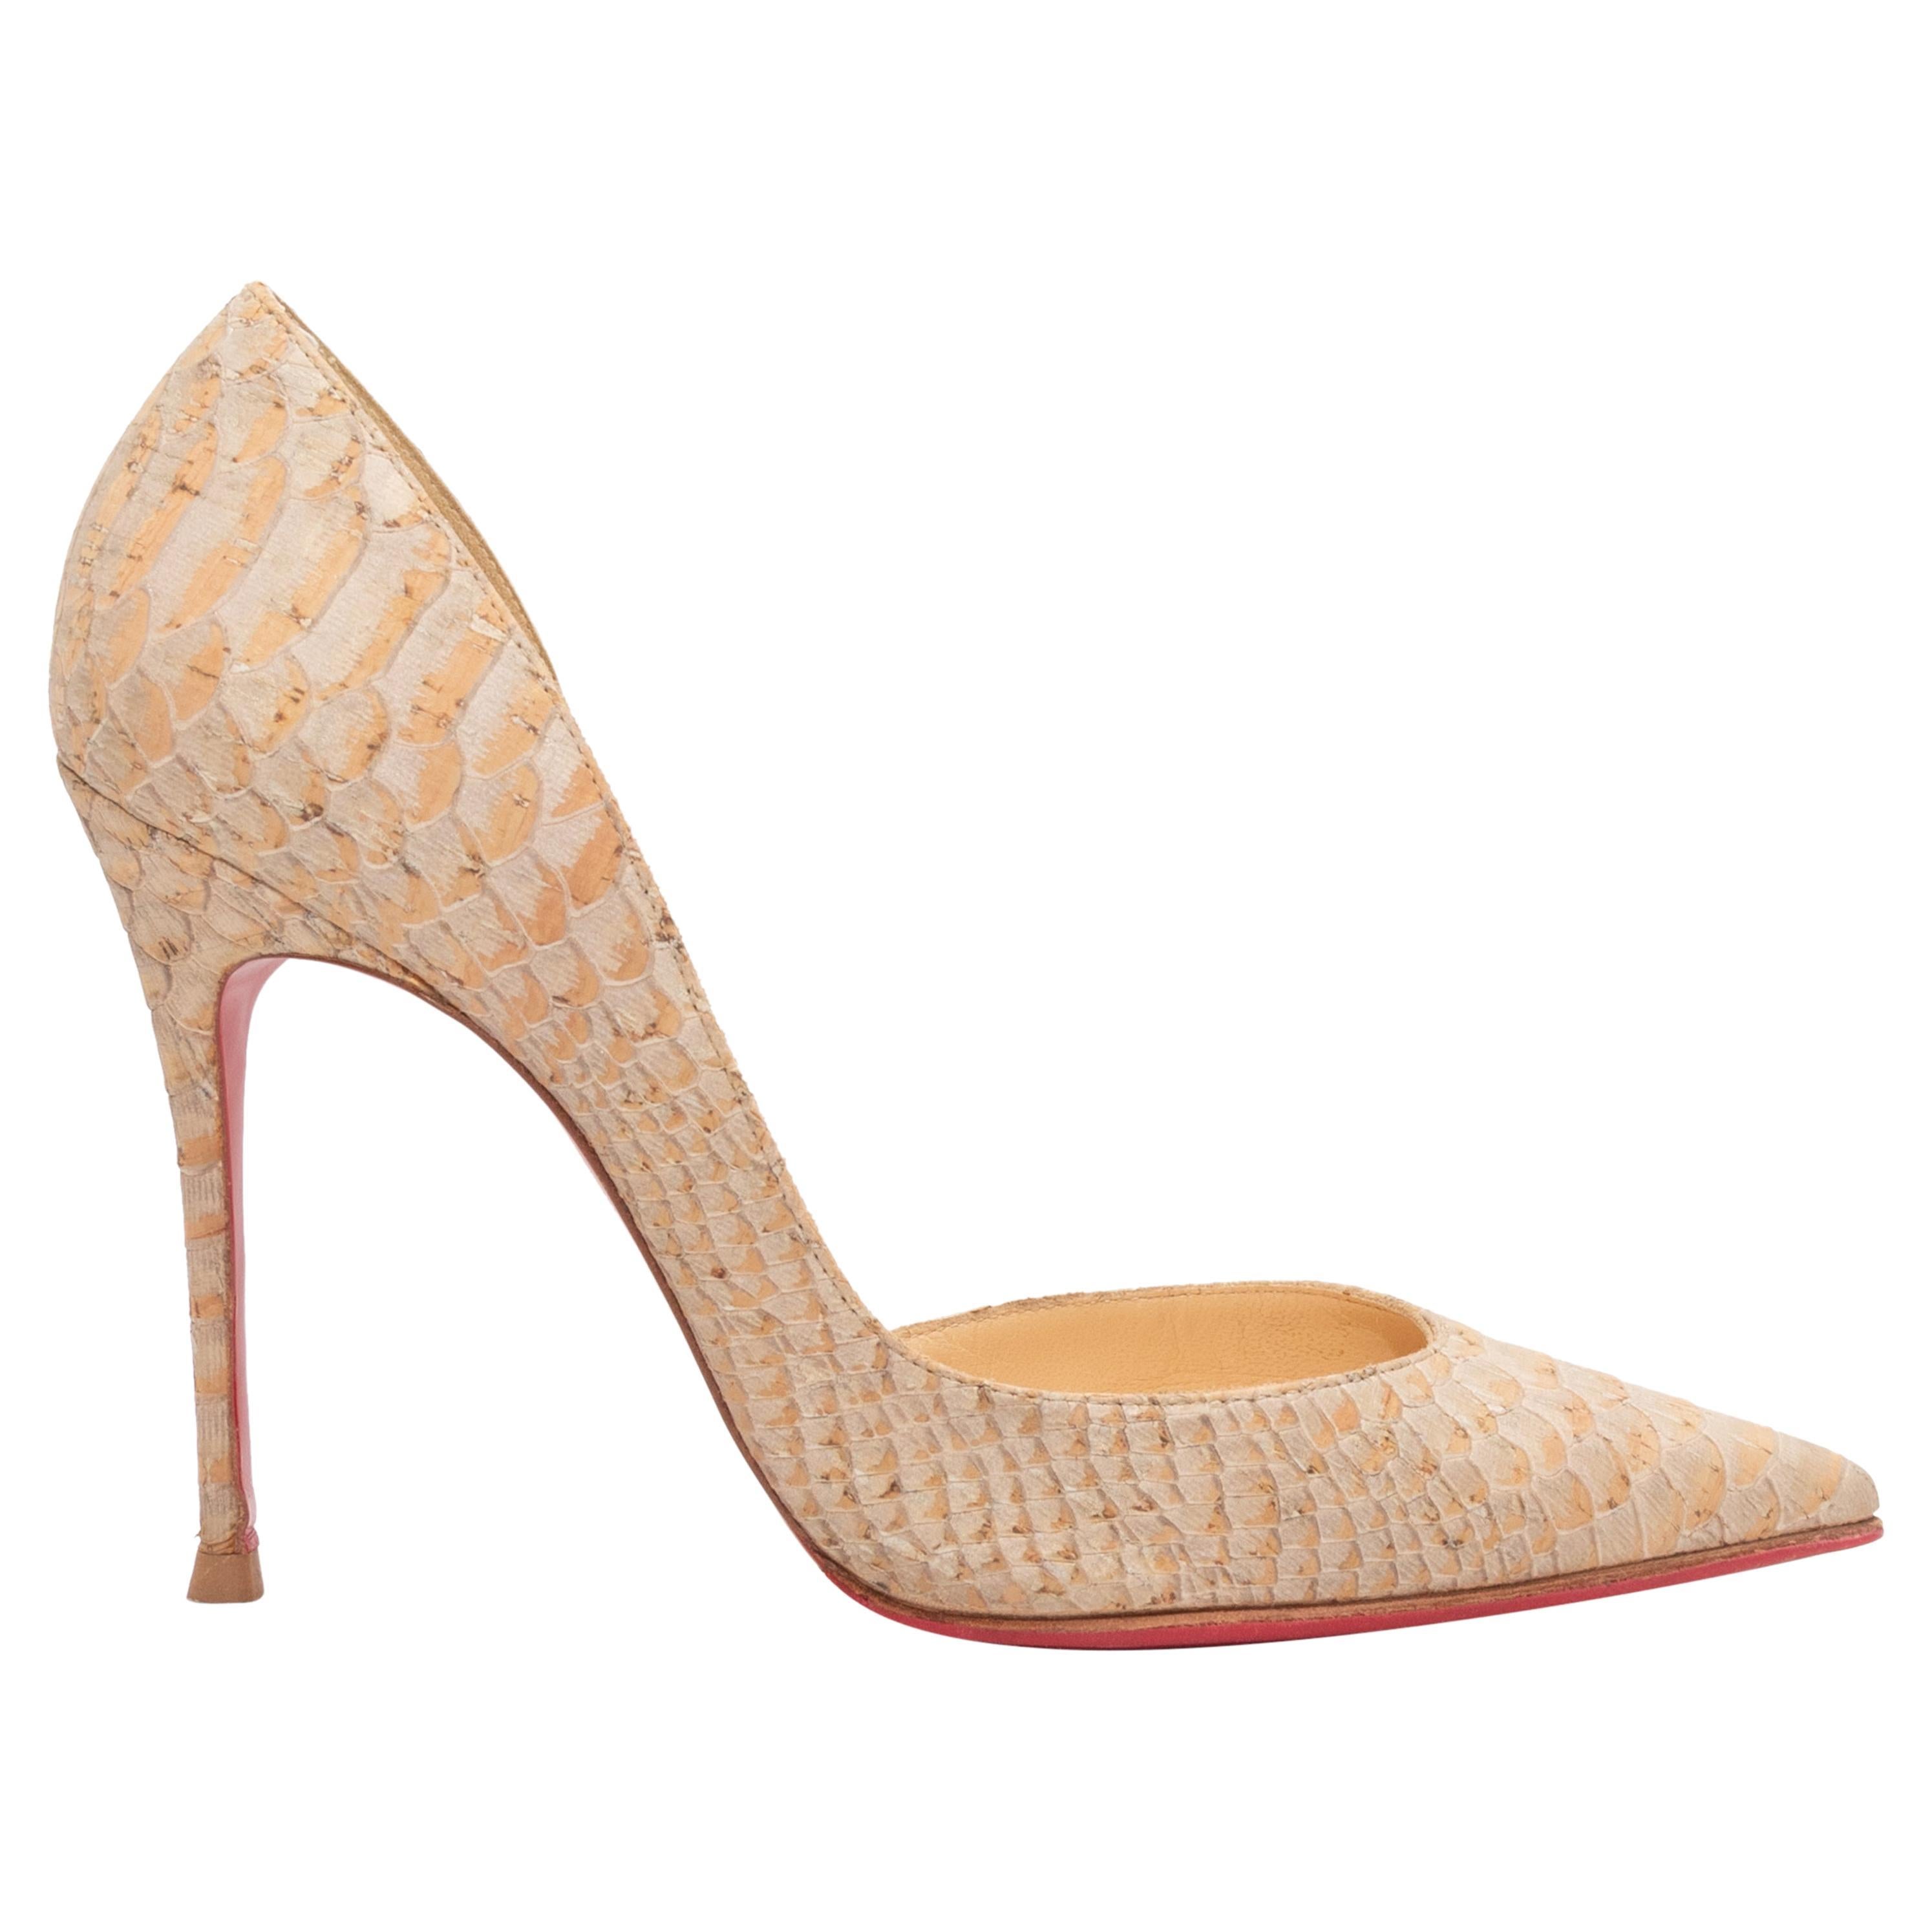 Beige Christian Louboutin Python Pointed-Toe Pumps